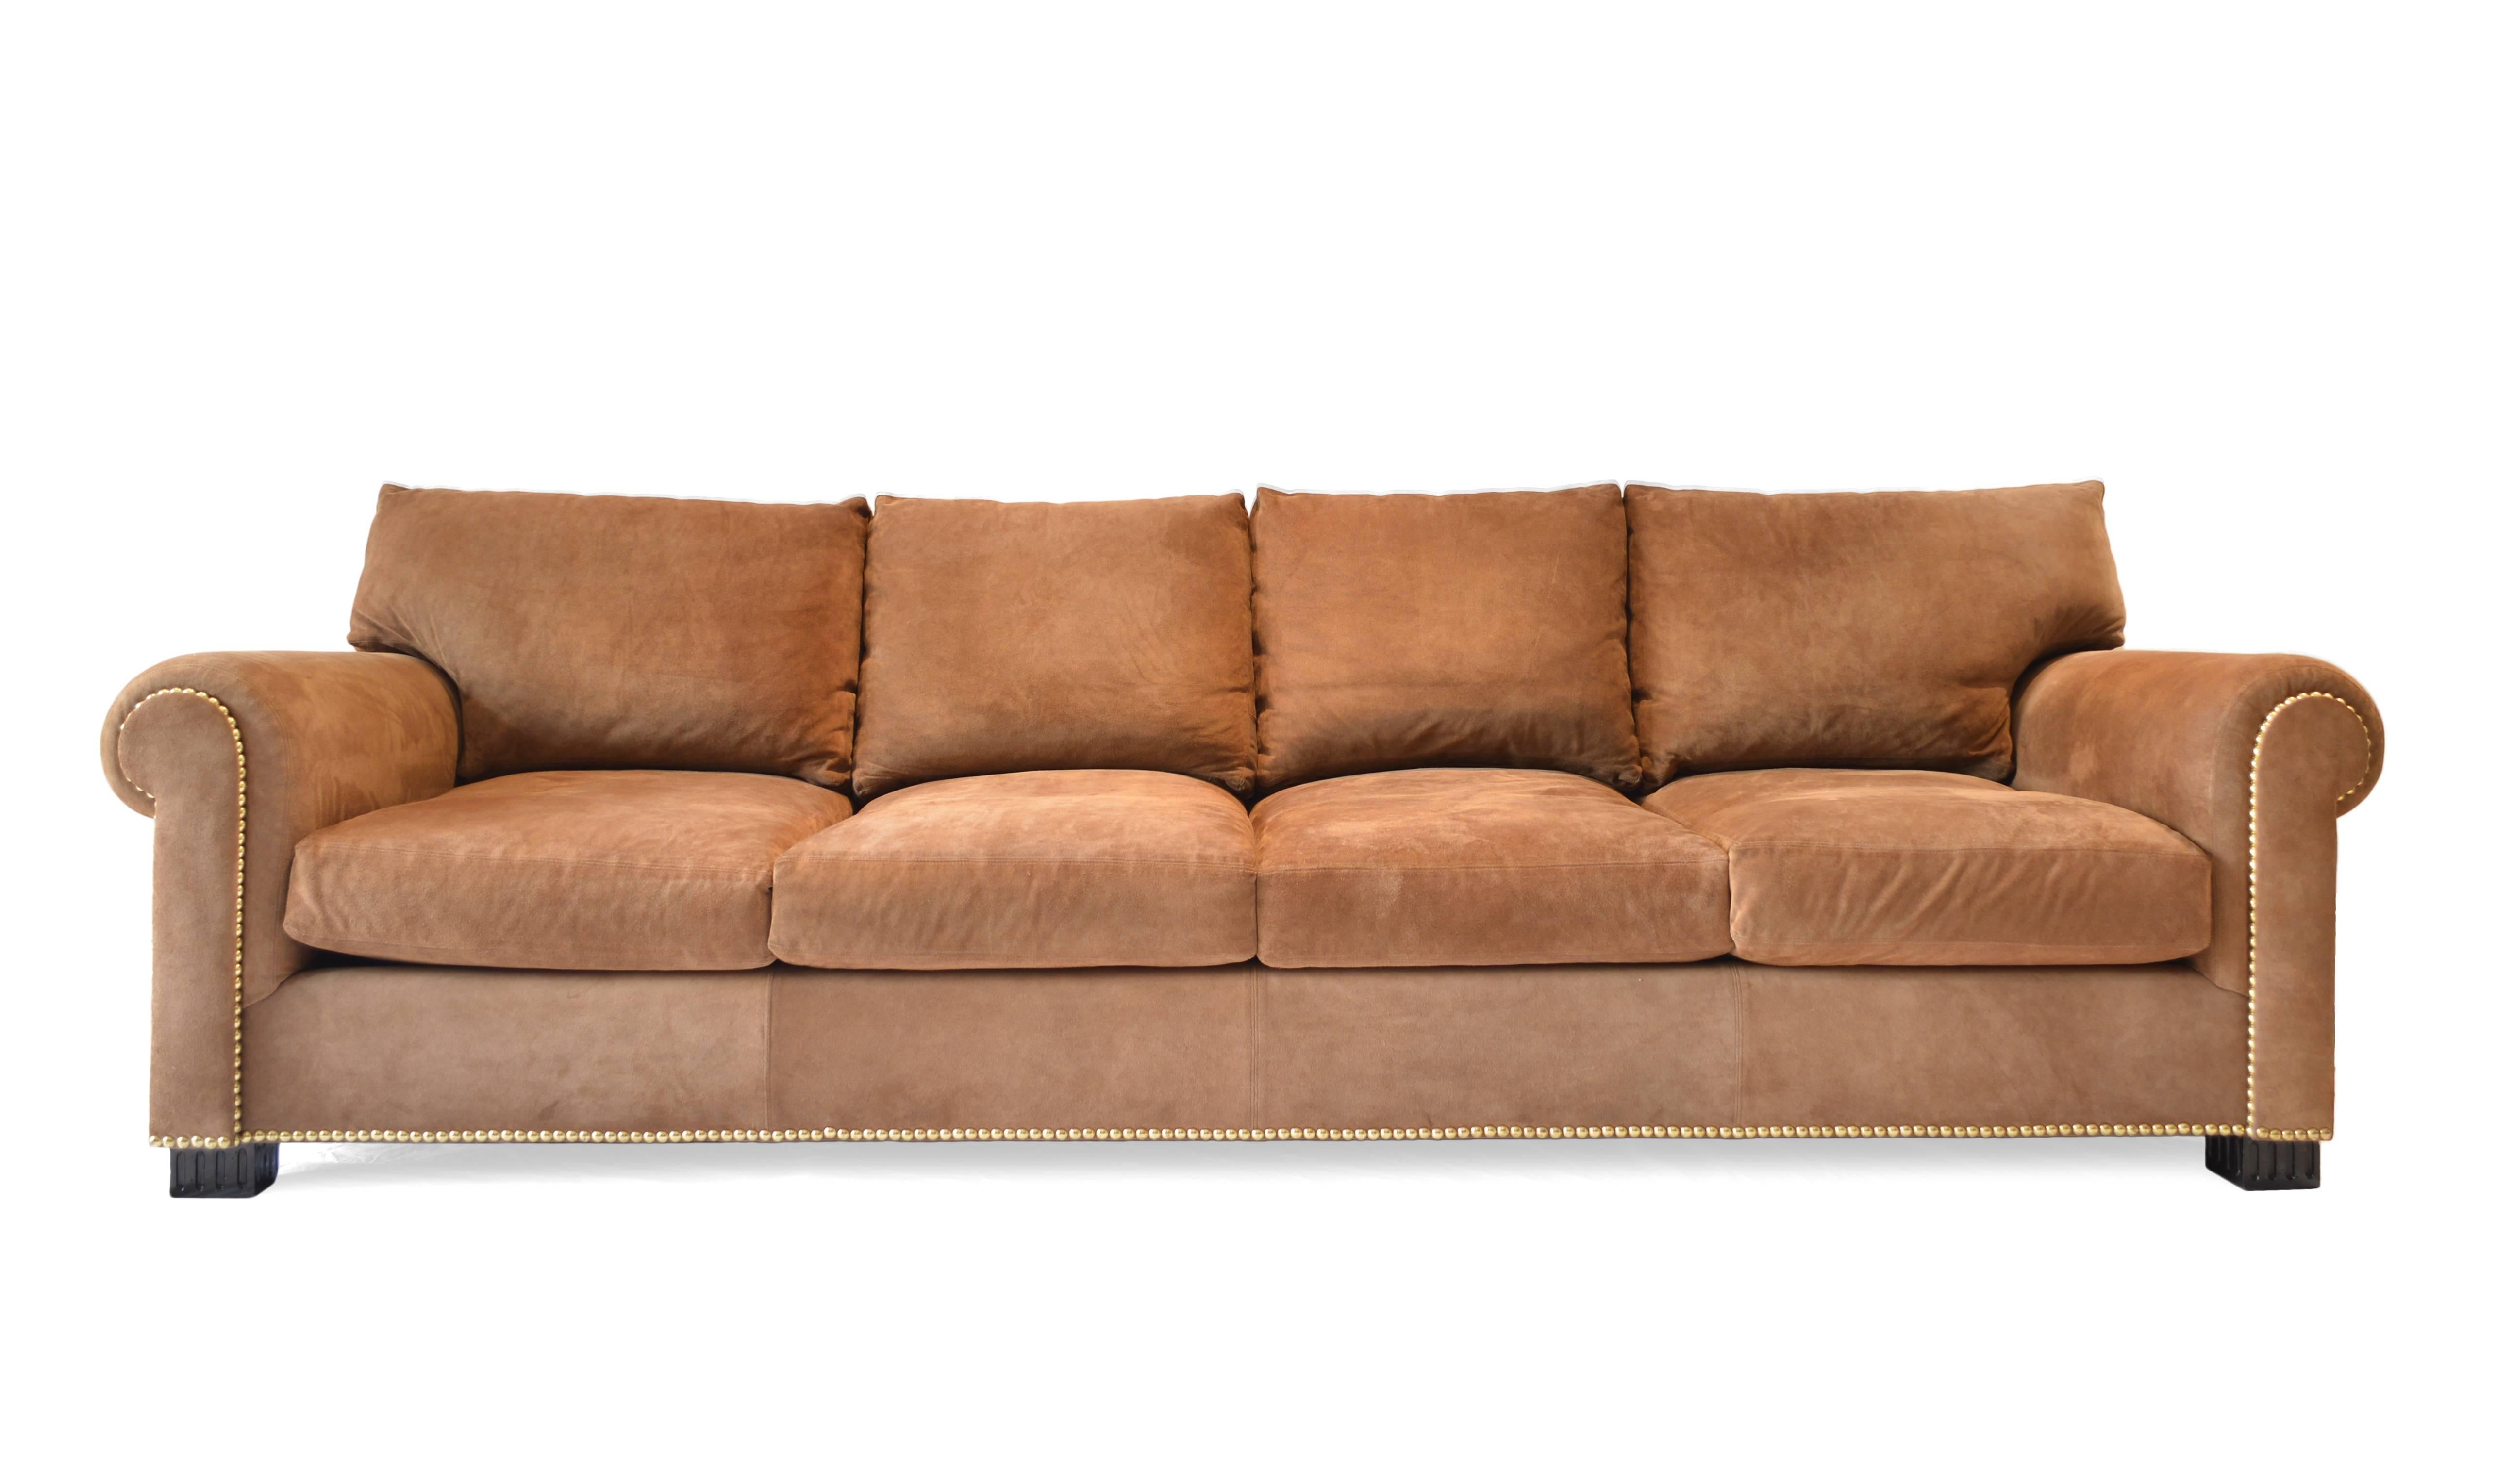 Tan suede sofa with deep comfortable seats and nailhead trim detailing. Made by Ralph Lauren.